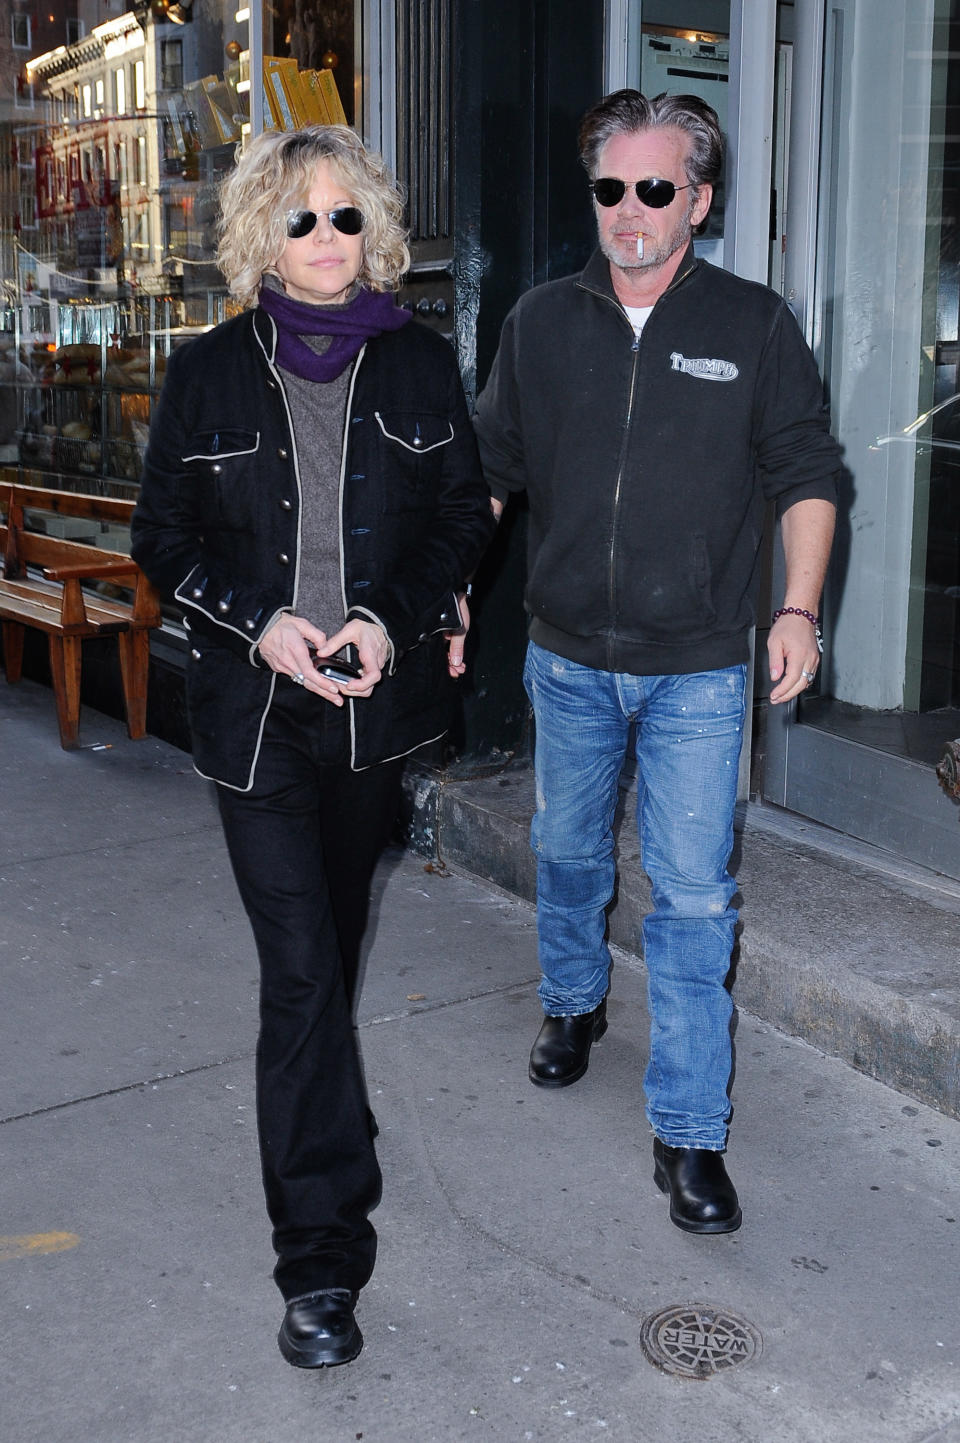 NEW YORK - JANUARY 05:  Actress Meg Ryan (L) and singer John Mellencamp leave E.A.T. restaurant on January 5, 2011 in New York City.  (Photo by Ray Tamarra/Getty Images)